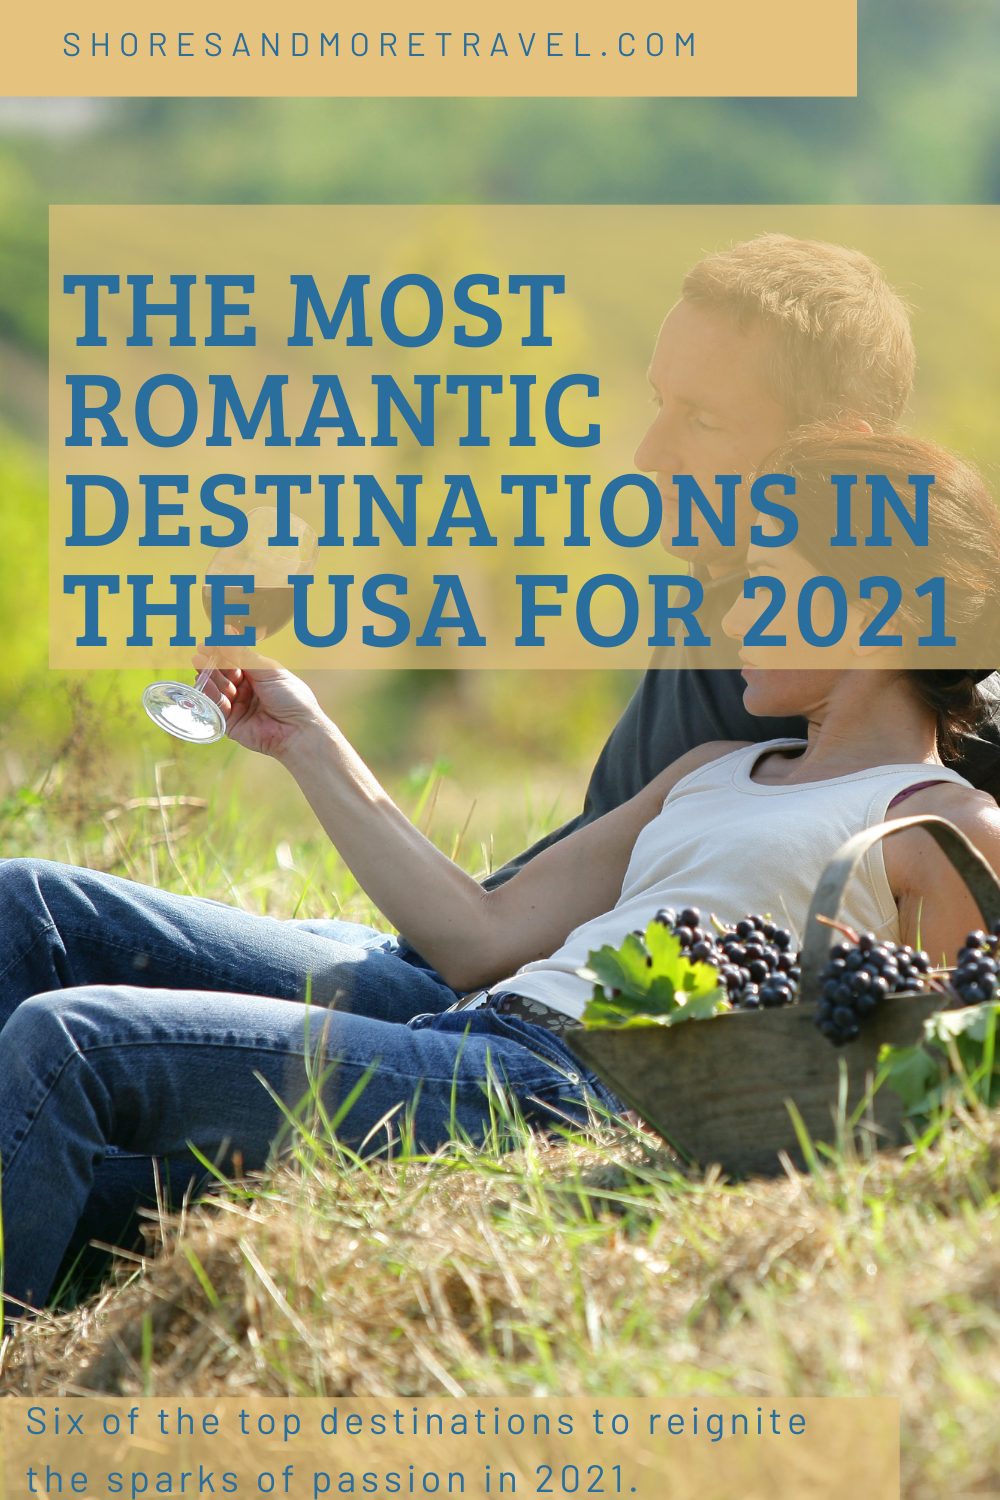 The Most Romantic Destinations in the USA for 2021